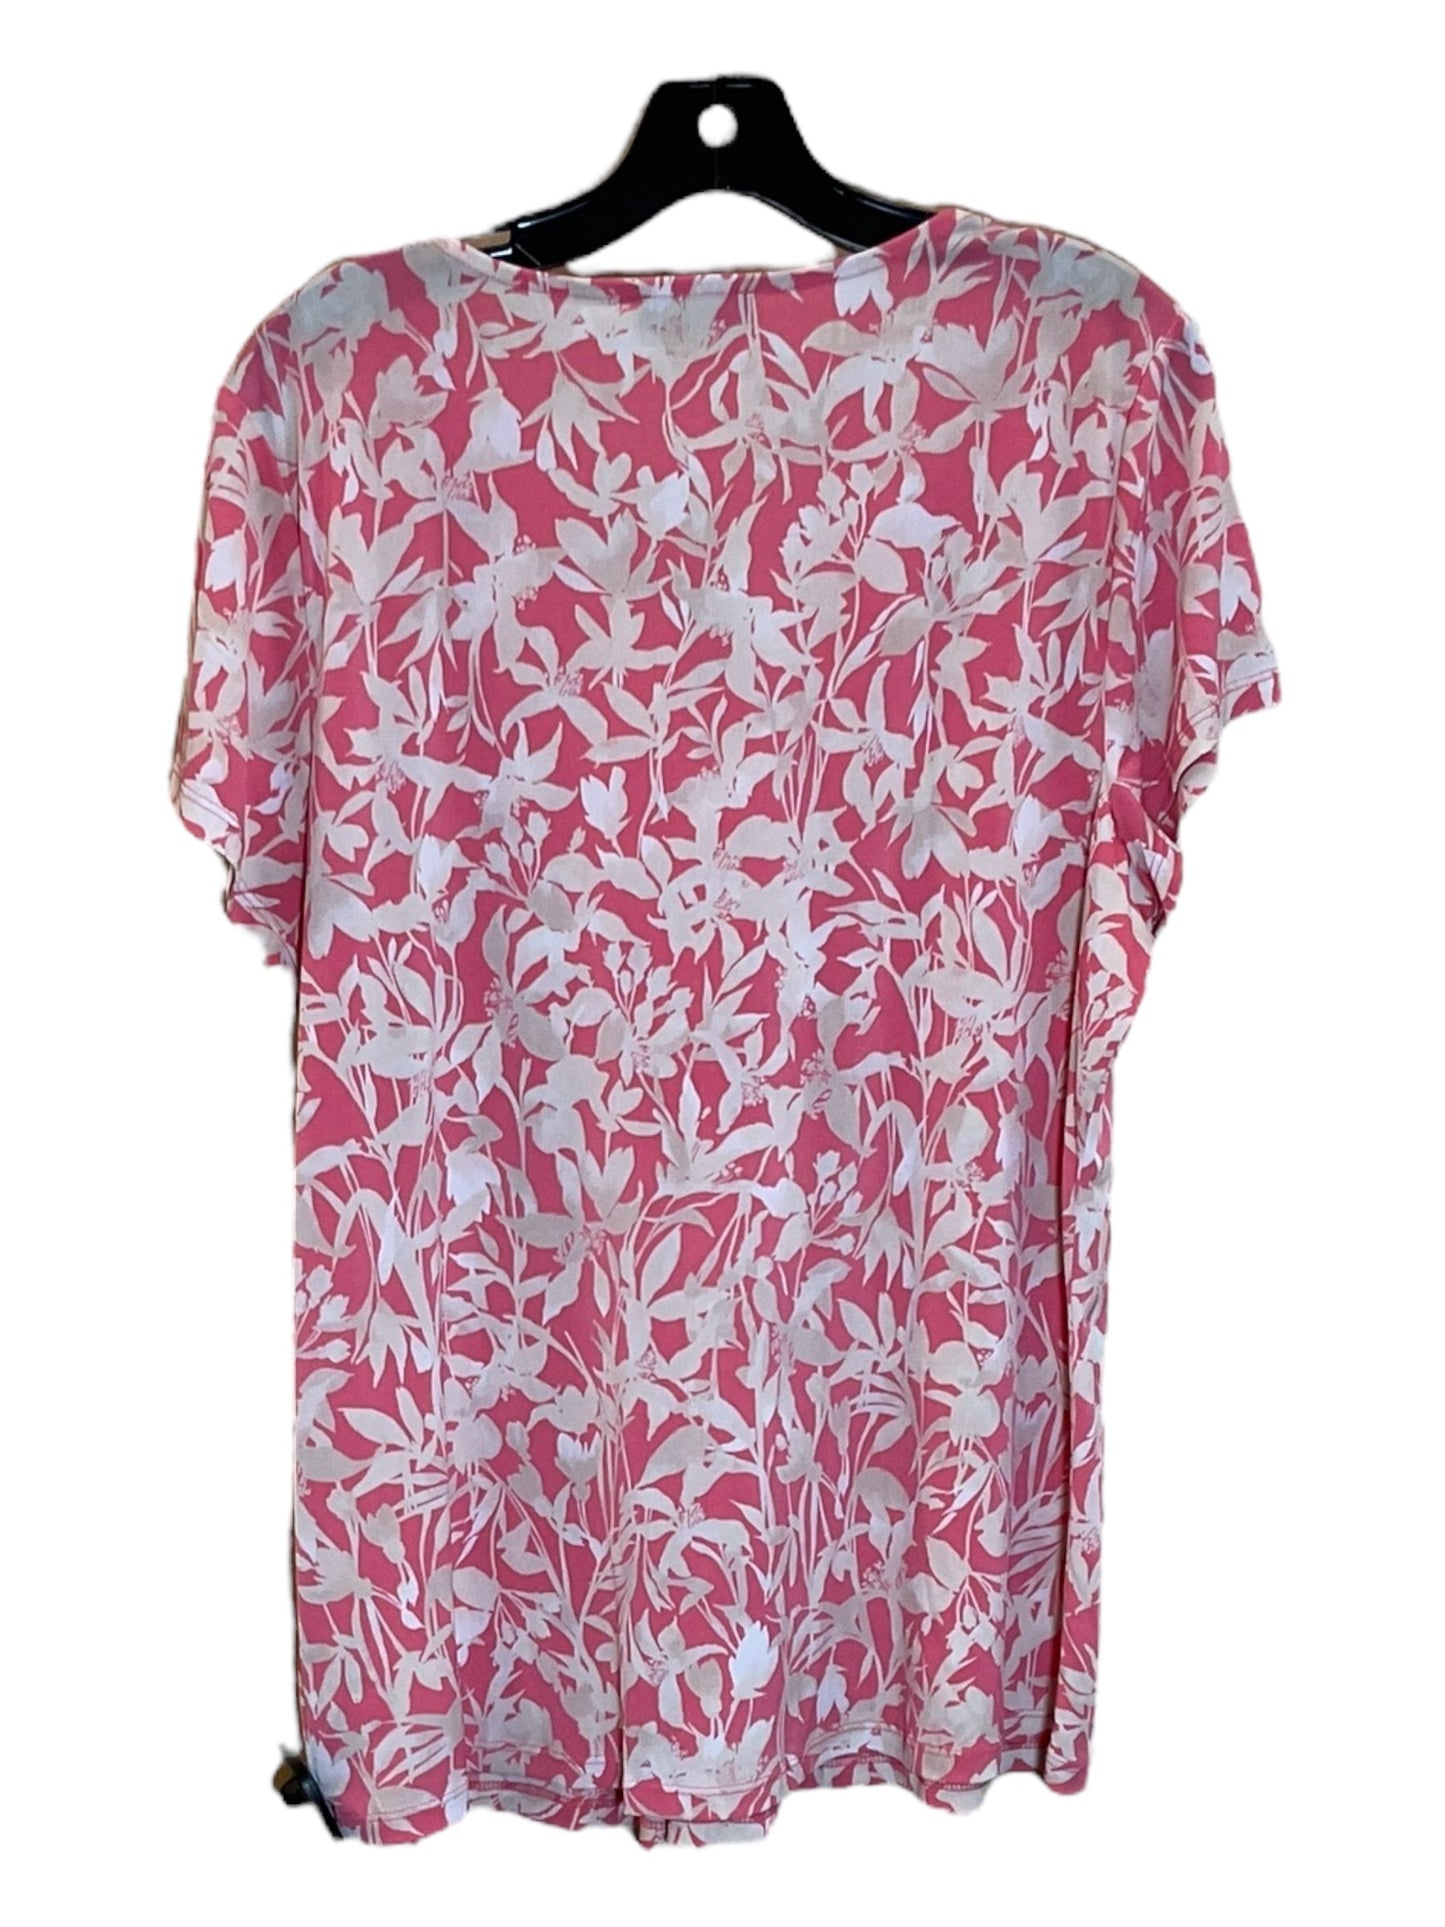 Coral Top Short Sleeve Lane Bryant, Size Xl